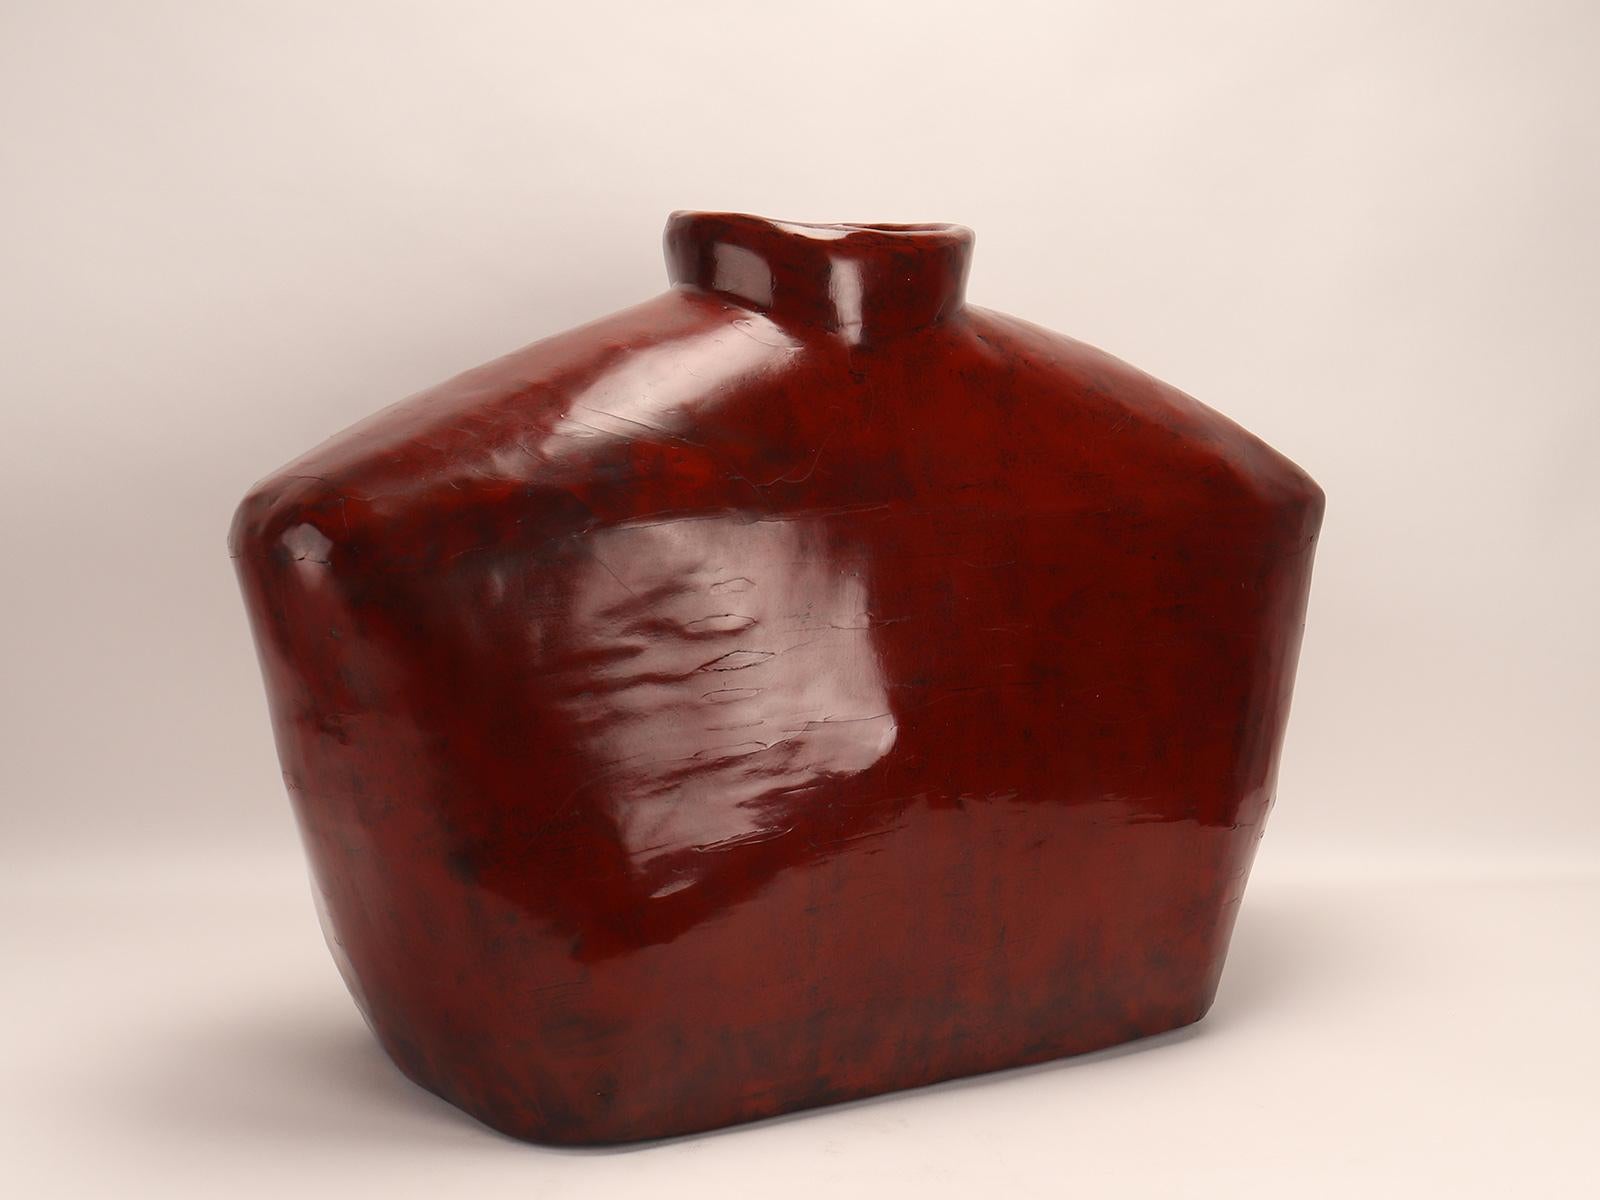 Clay Large oblong-shaped lacquer vase, Shanxi, China late 19th century. For Sale